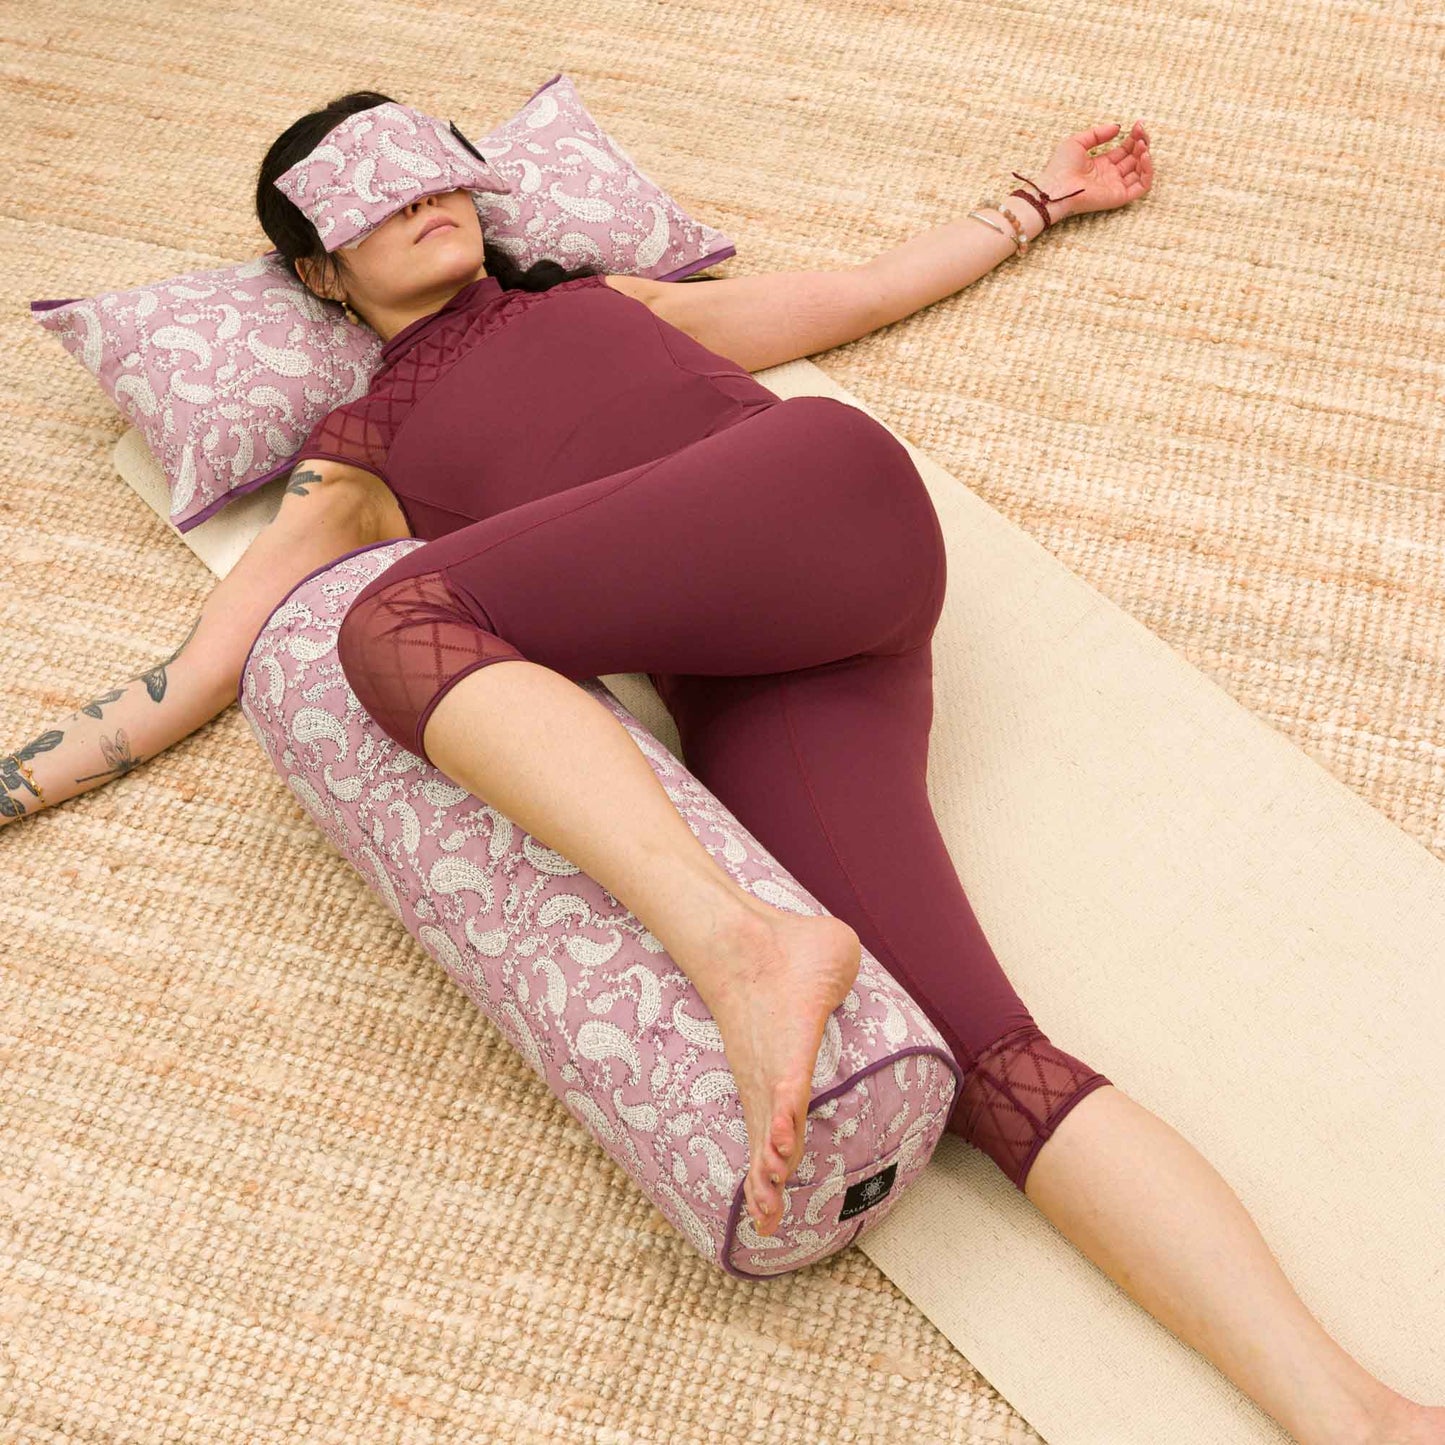 Restorative Yoga Poses to Support Calm, Focus, and Sleep